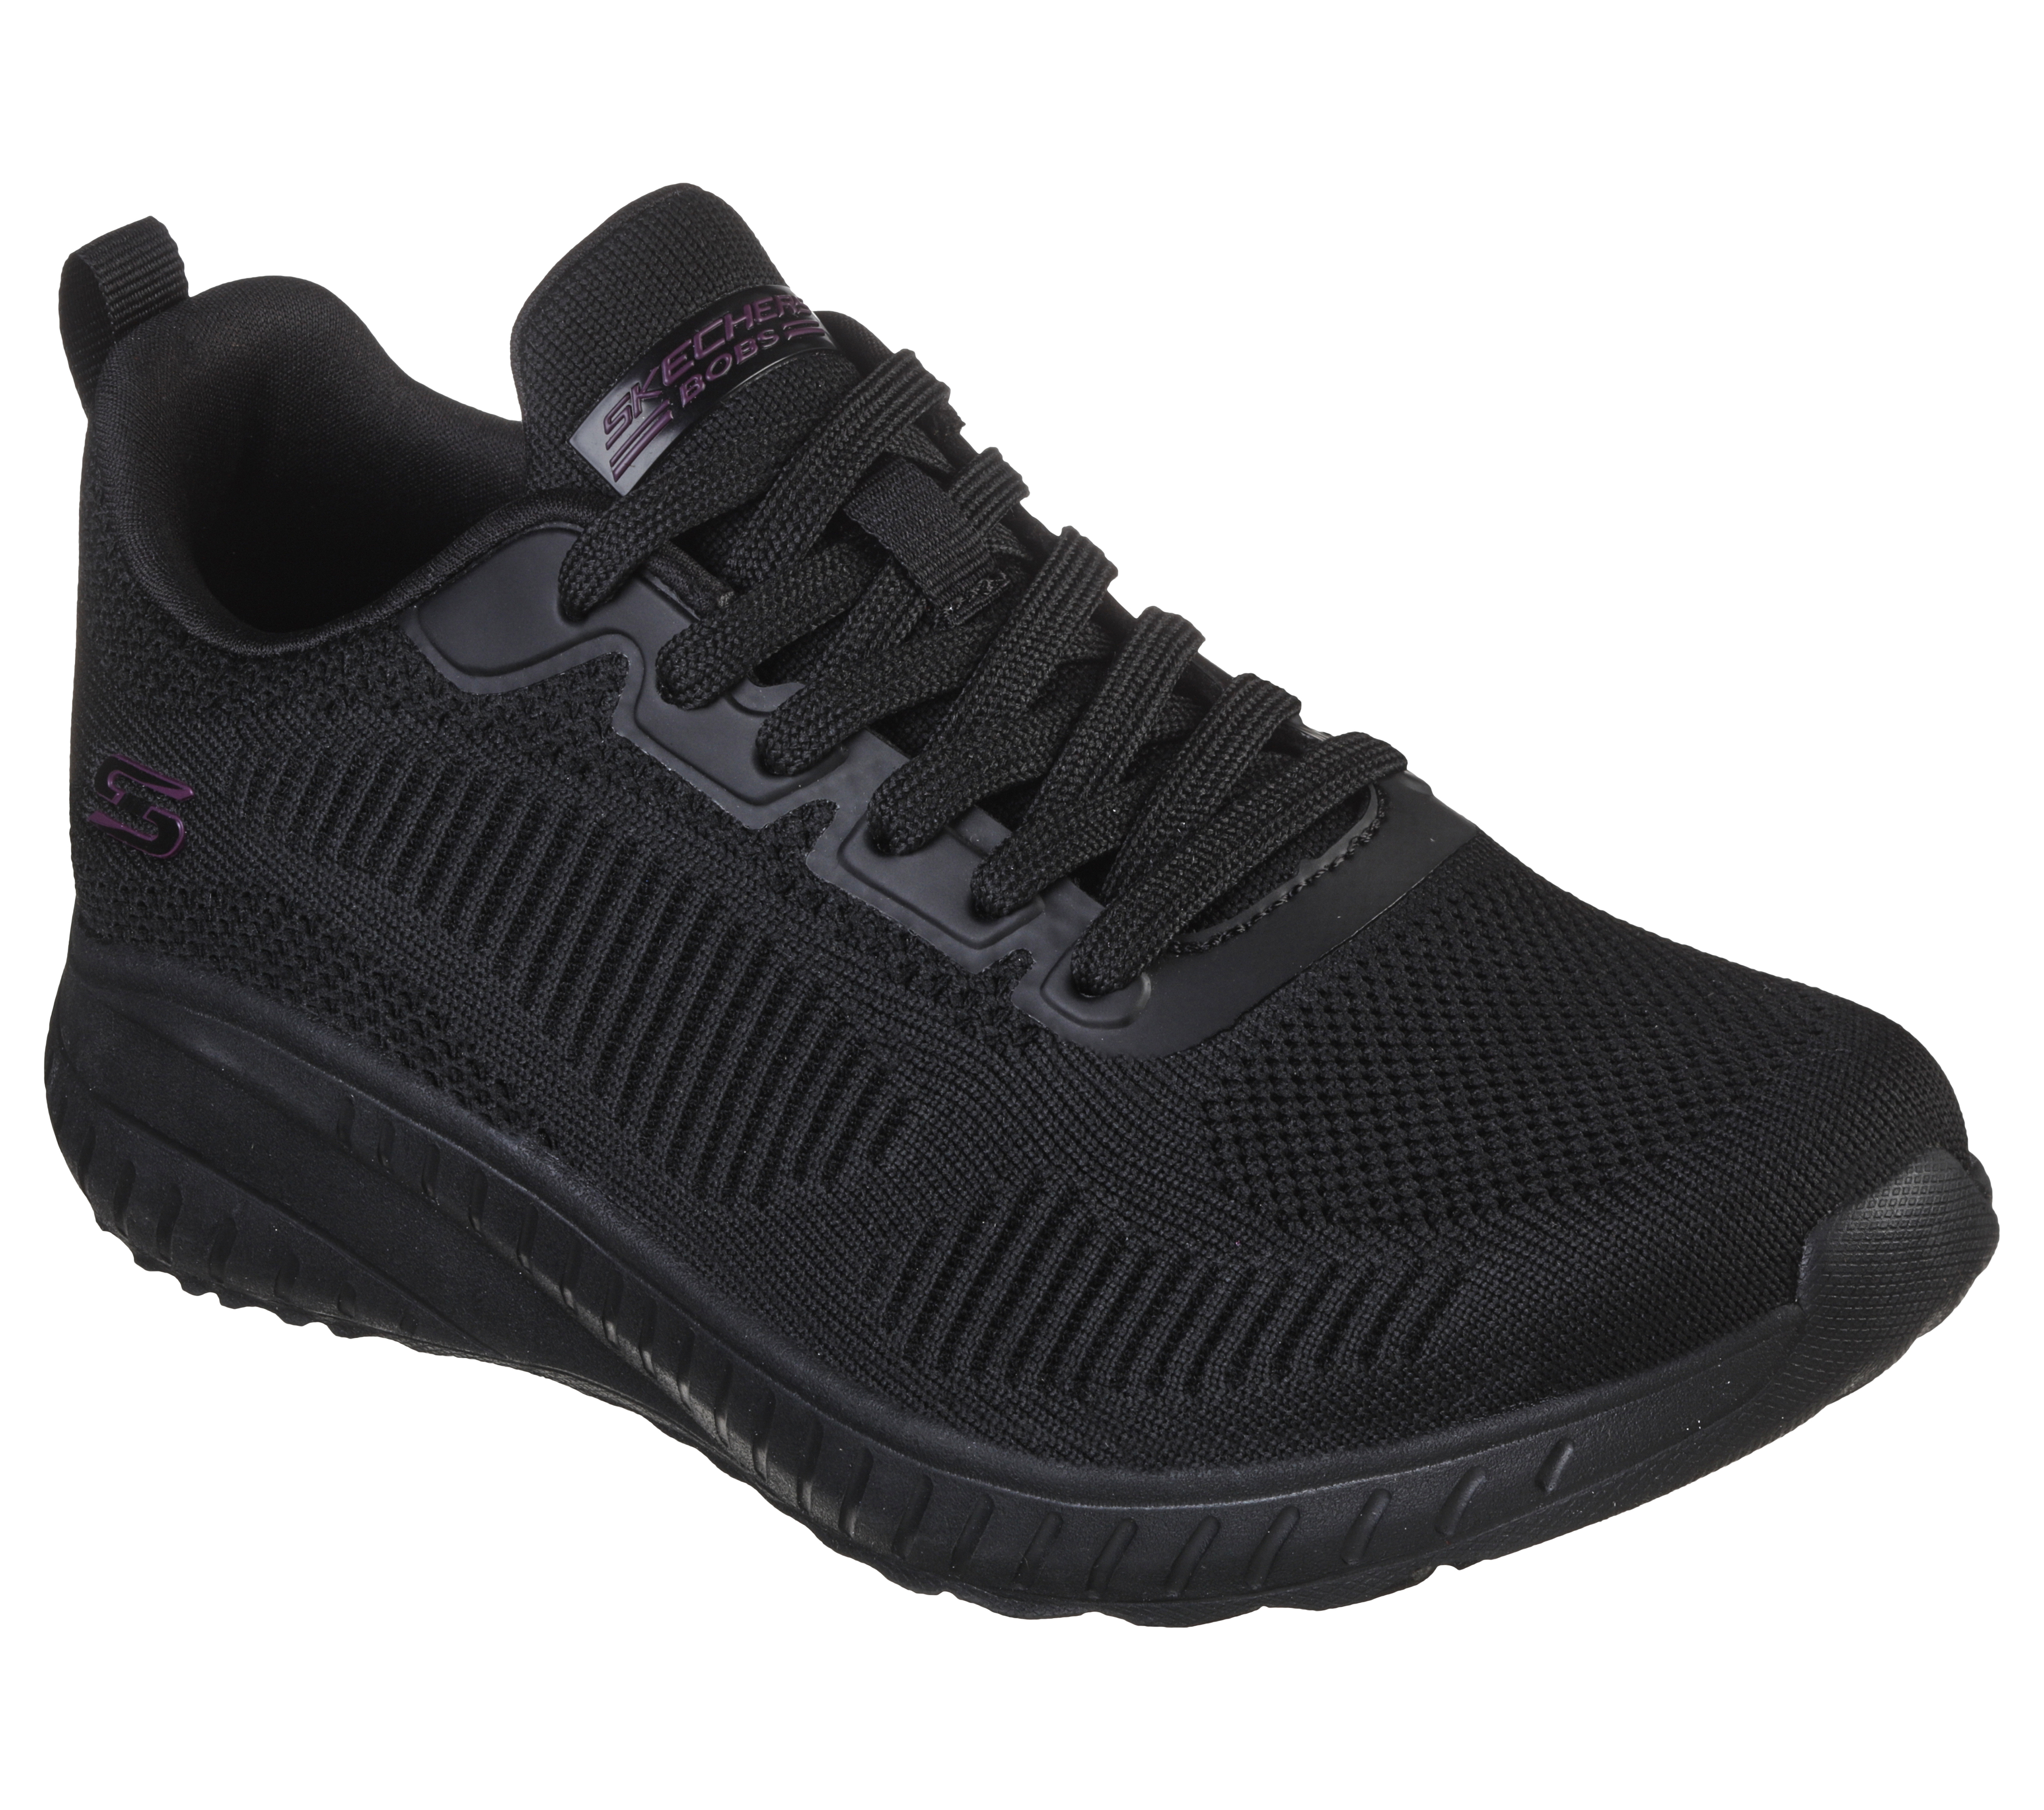 Skechers Sneakersy Bobs Squad Chaos - F